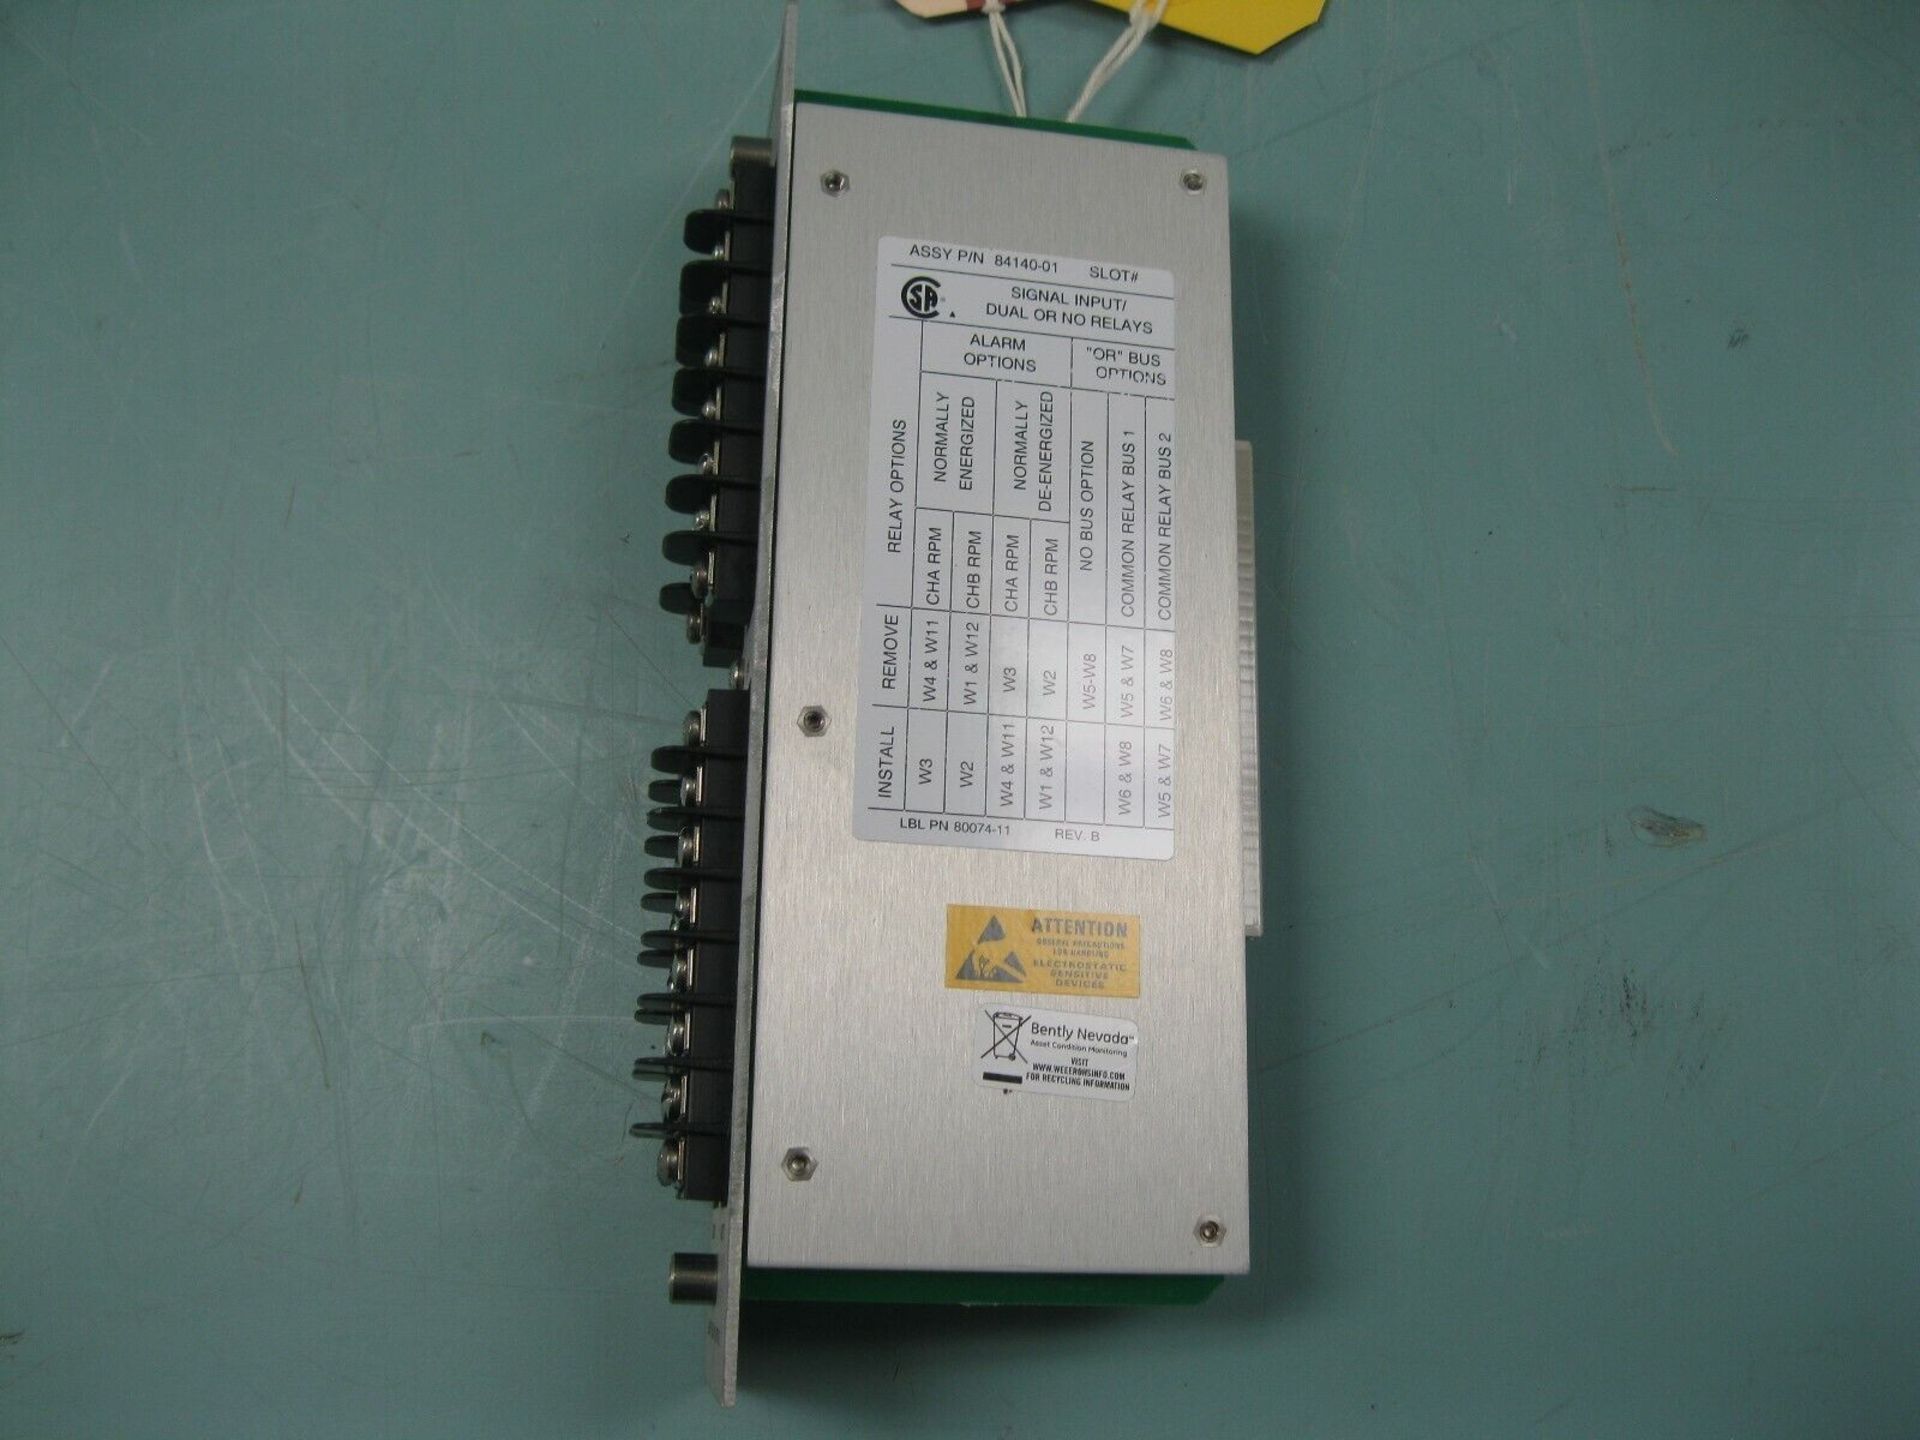 Lot of (39) Bently Nevada Signal Input Relay Card NEW (26) 84140-01, (13) 81546-01 (Located - Image 4 of 9